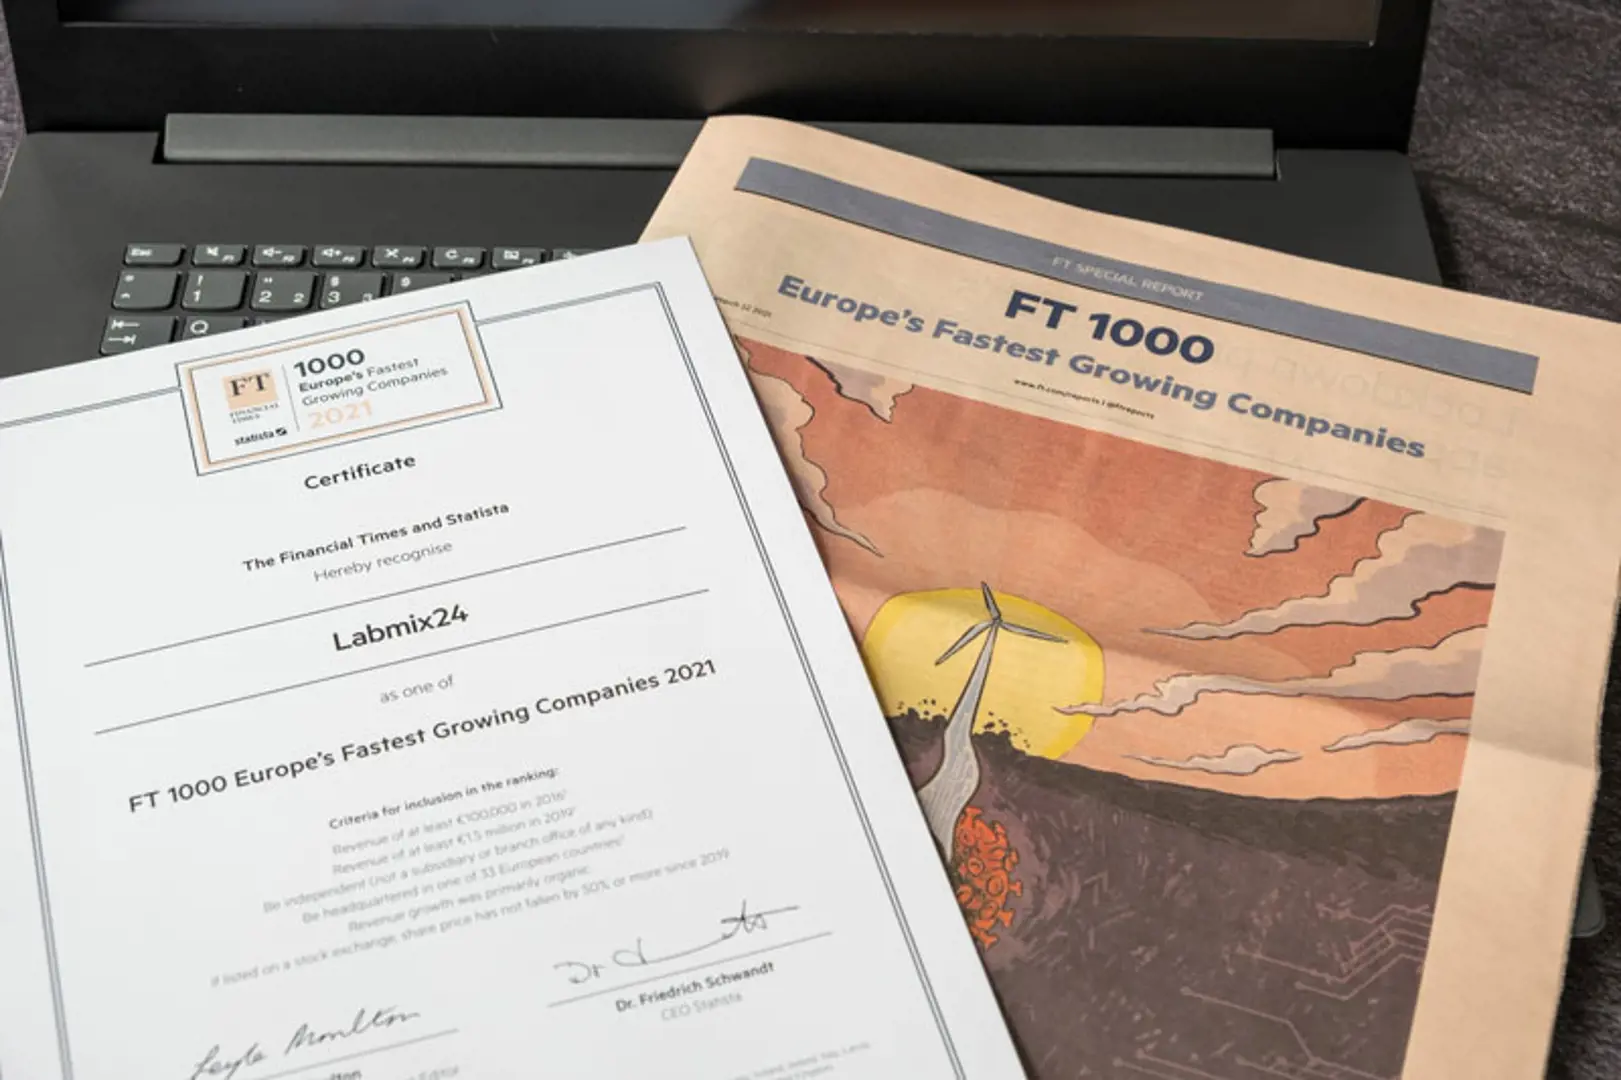 Labmix24 FT 1000 Certificate and the March 22, 2021 issue of the Financial Times